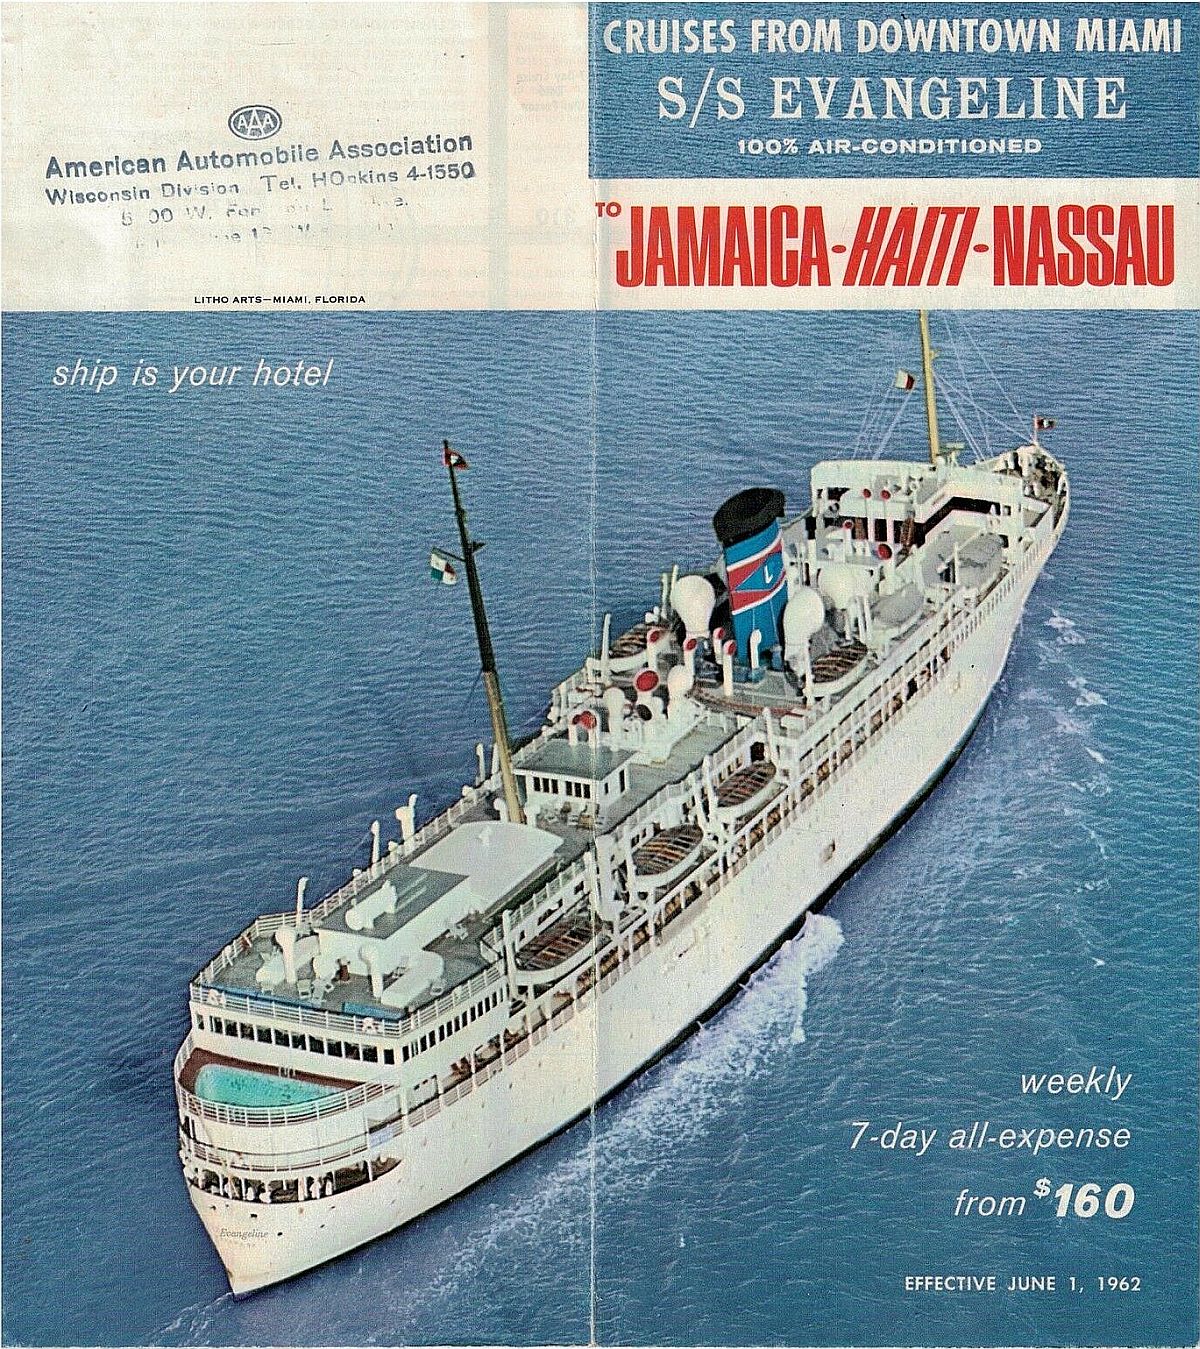 ss Evangeline effective June 1, 1962: Cruises from downtown Miami